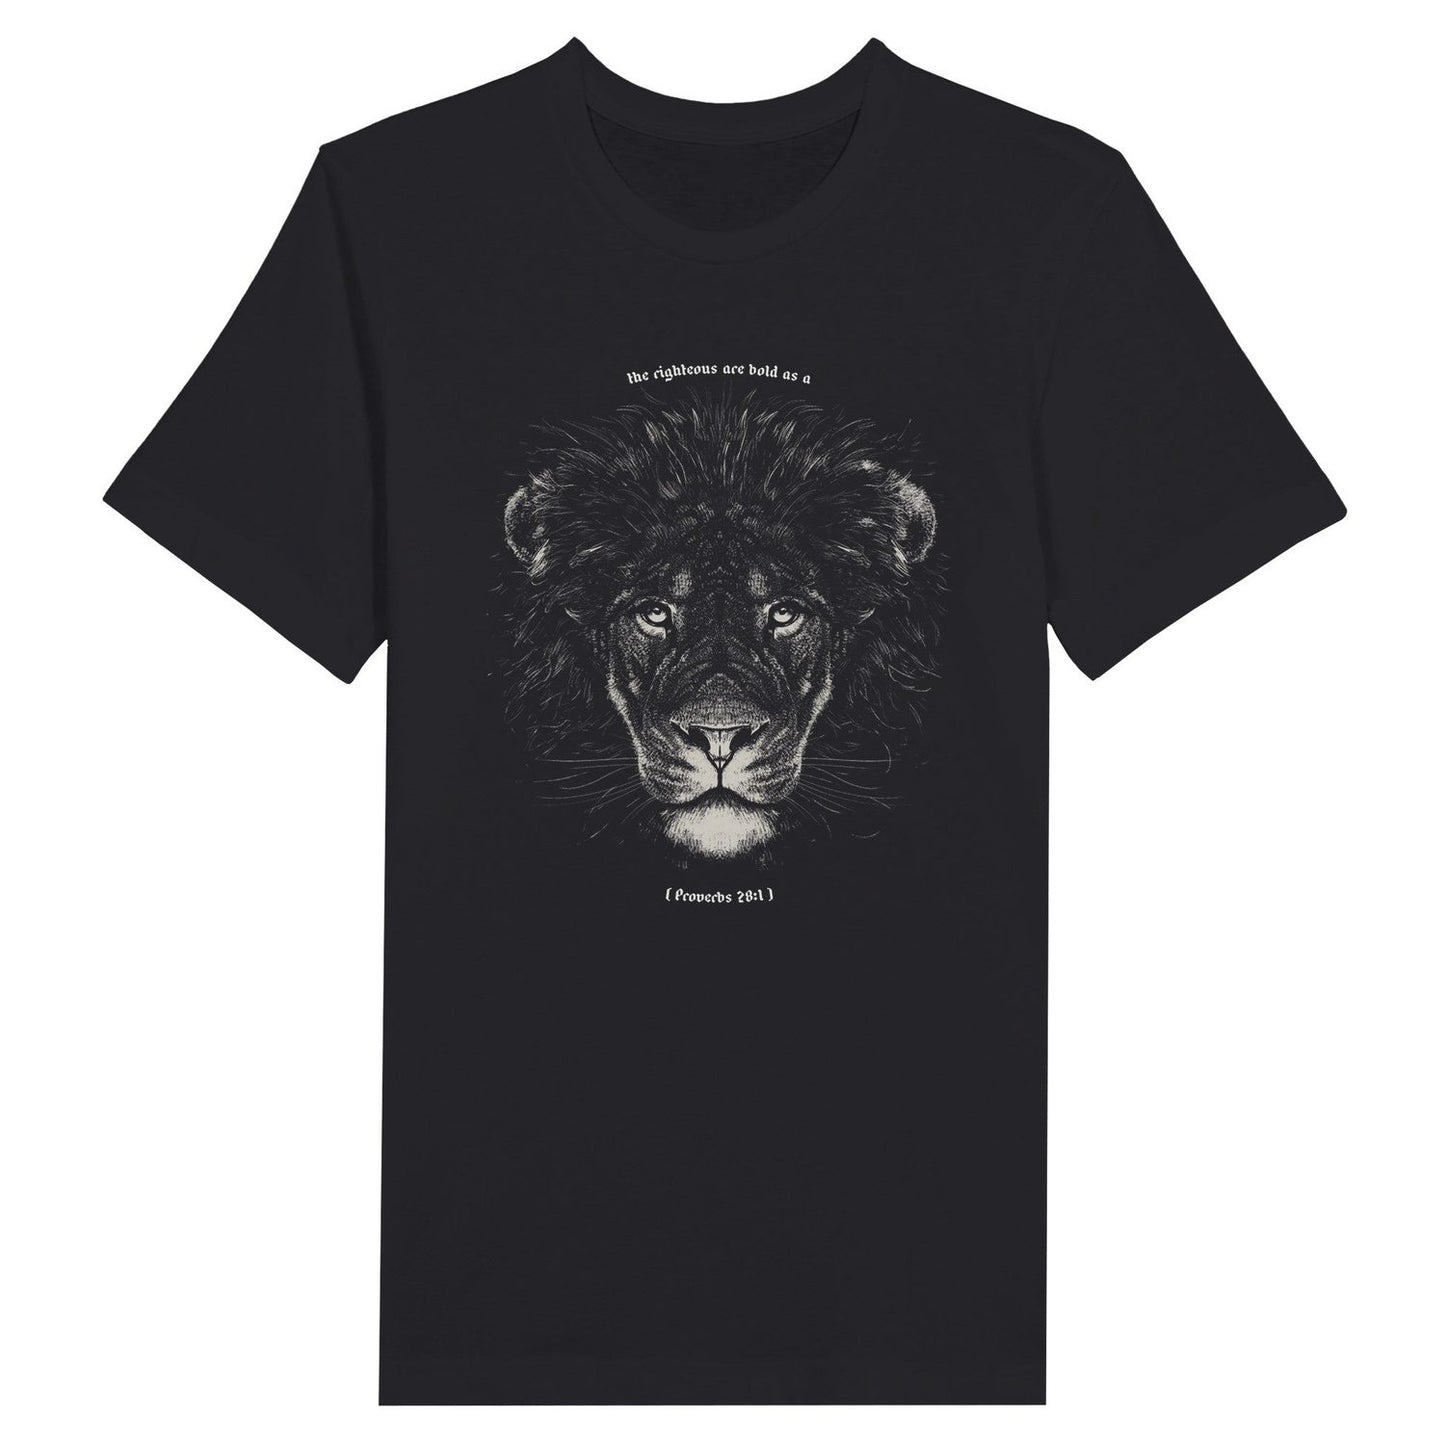 An image of The Righteous Are Bold As A Lion | Premium Unisex Christian T-shirt available at 3rd Day Christian Clothing UK